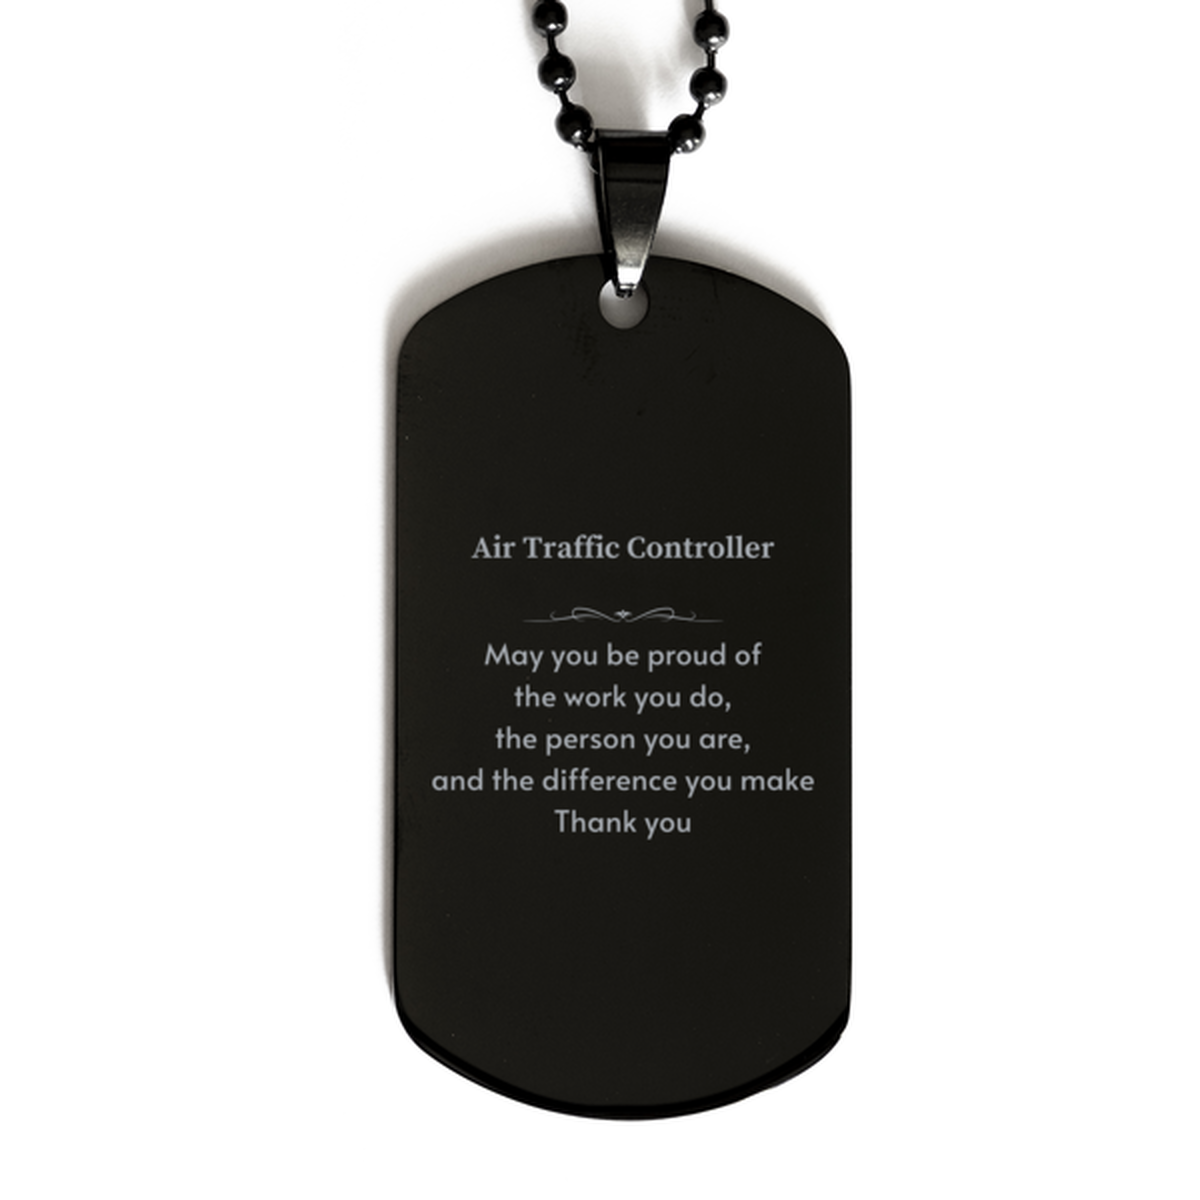 Heartwarming Black Dog Tag Retirement Coworkers Gifts for Air Traffic Controller, Air Traffic Controller May You be proud of the work you do, the person you are Gifts for Boss Men Women Friends